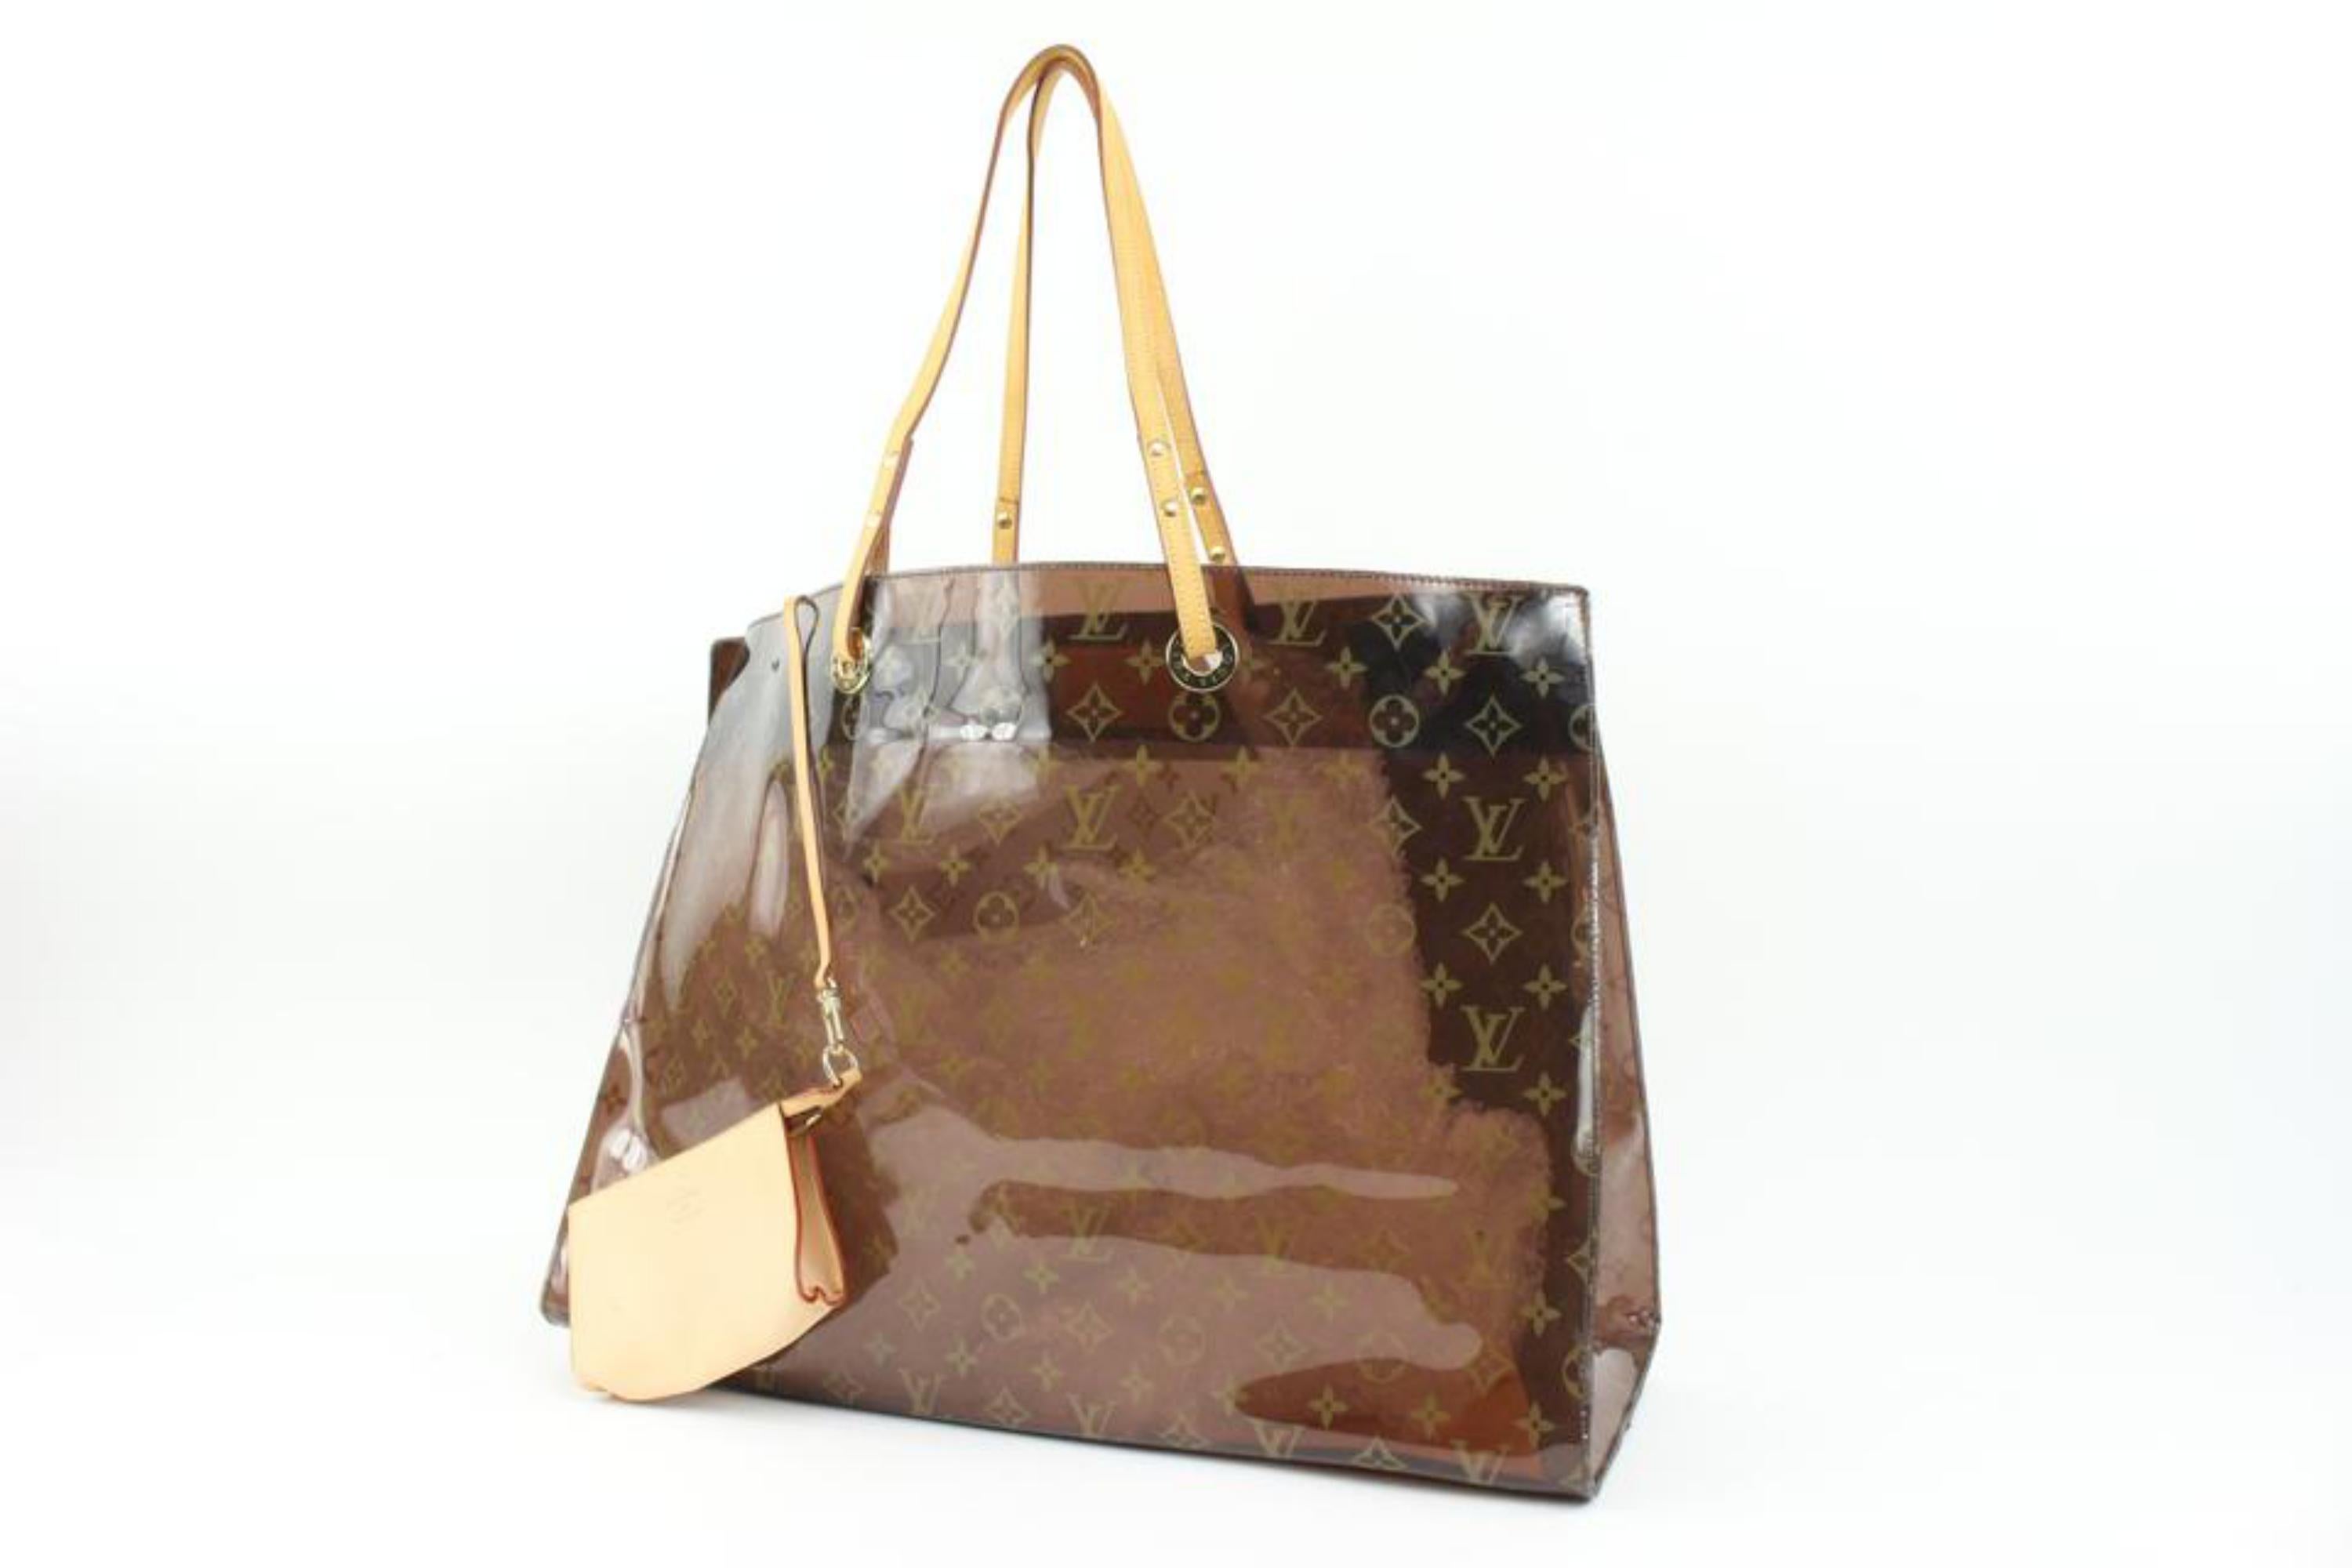 Louis Vuitton Limited Translucent Monogram Ambre Cabas Cruise GM Beach Tote 85lv221s
Date Code/Serial Number: LW0040
Made In: Spain
Measurements: Length:  18.5